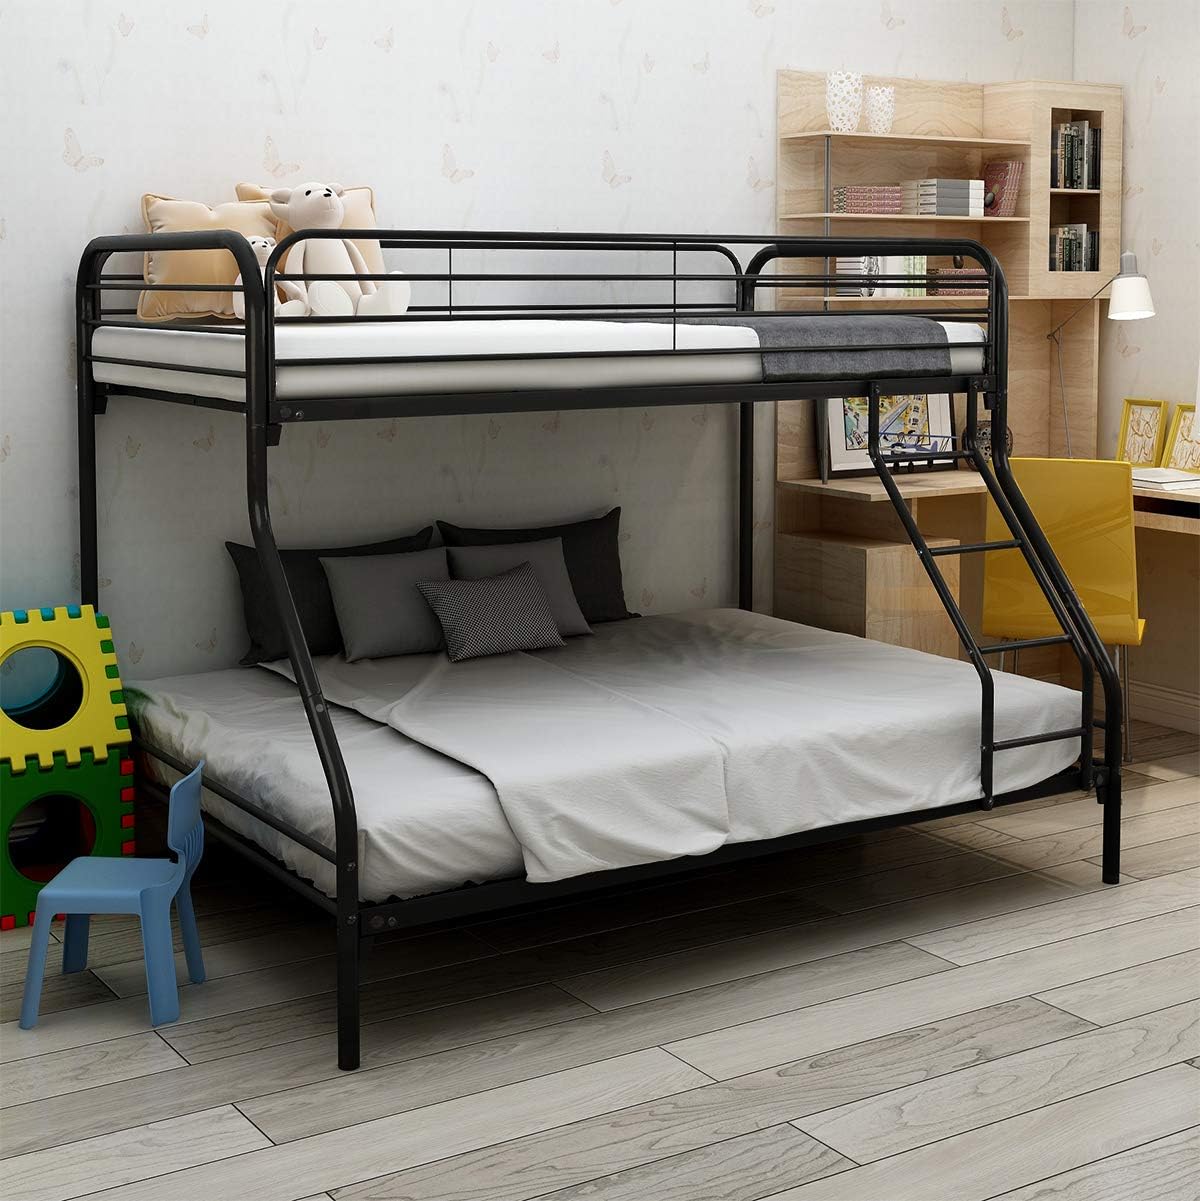 Can These Extra Sturdy Loft Beds Really Hold 300 Pounds: The Best Heavy Duty Loft Beds For Adults in 2023